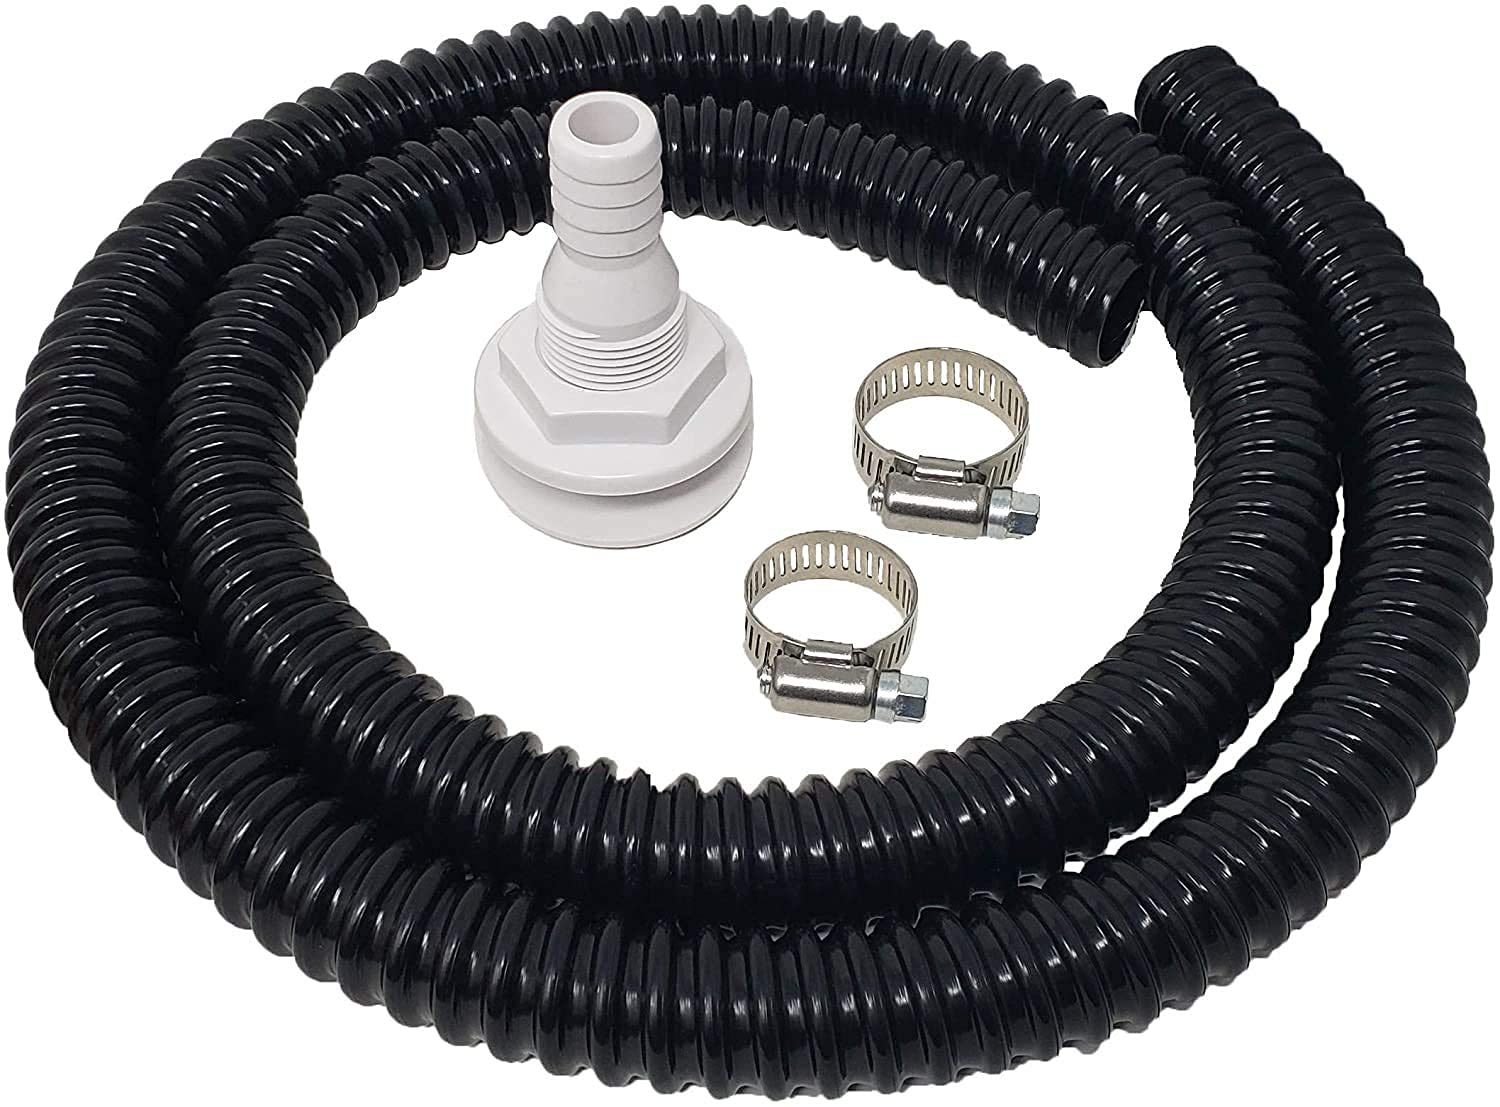 Sealproof Bilge Pump Hose 1-1/8-Inch Dia Plumbing Kit | 6 FT Premium Quality Kinkfree Flexible PVC Hose Made in USA | Includes 2 Hose Clamps and Thru-Hull Fitting - Opticdeals